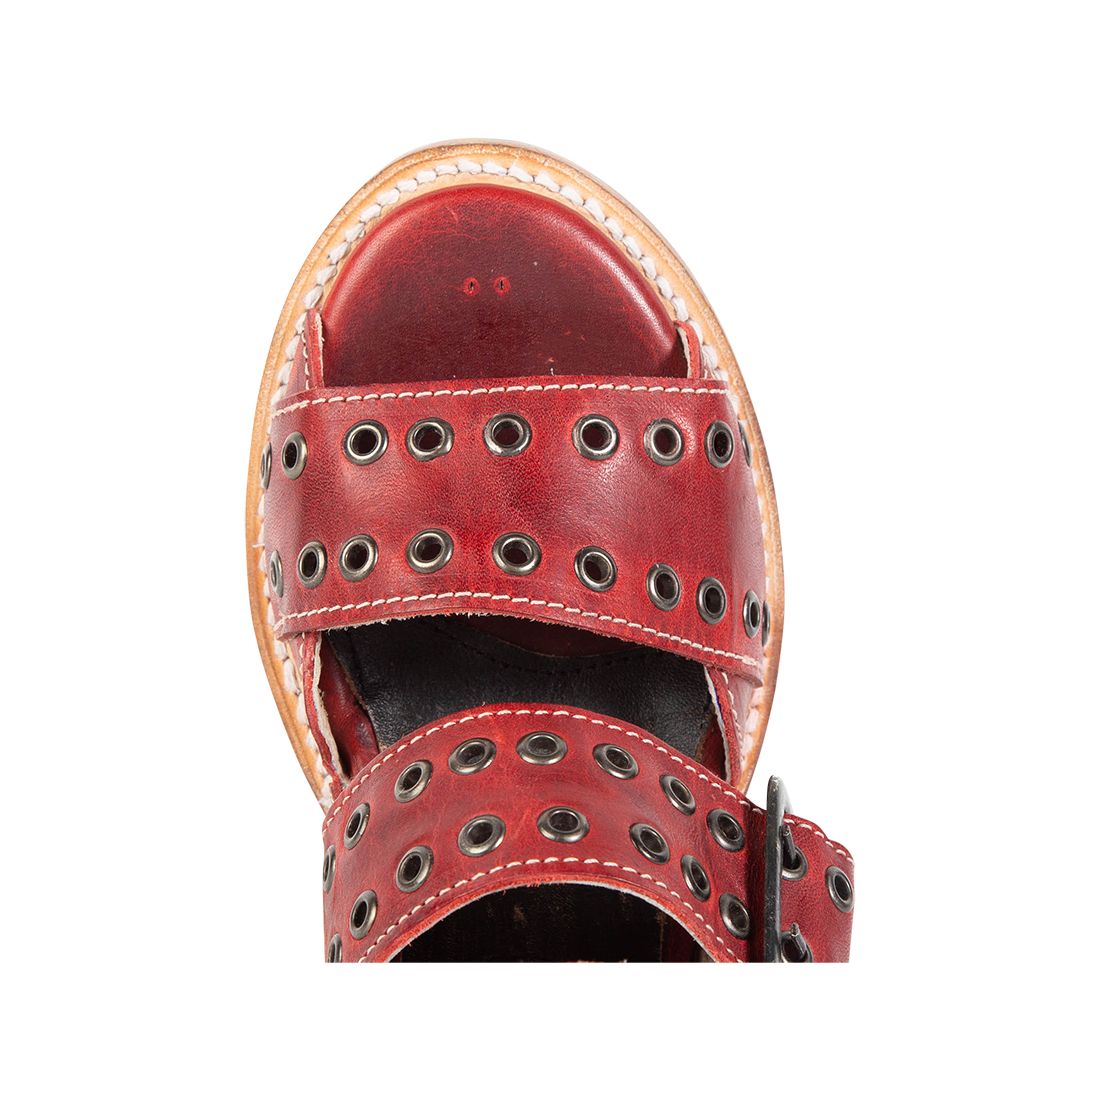 Top view showing round toe and metal buckles on FREEBIRD women's Blake red sandal